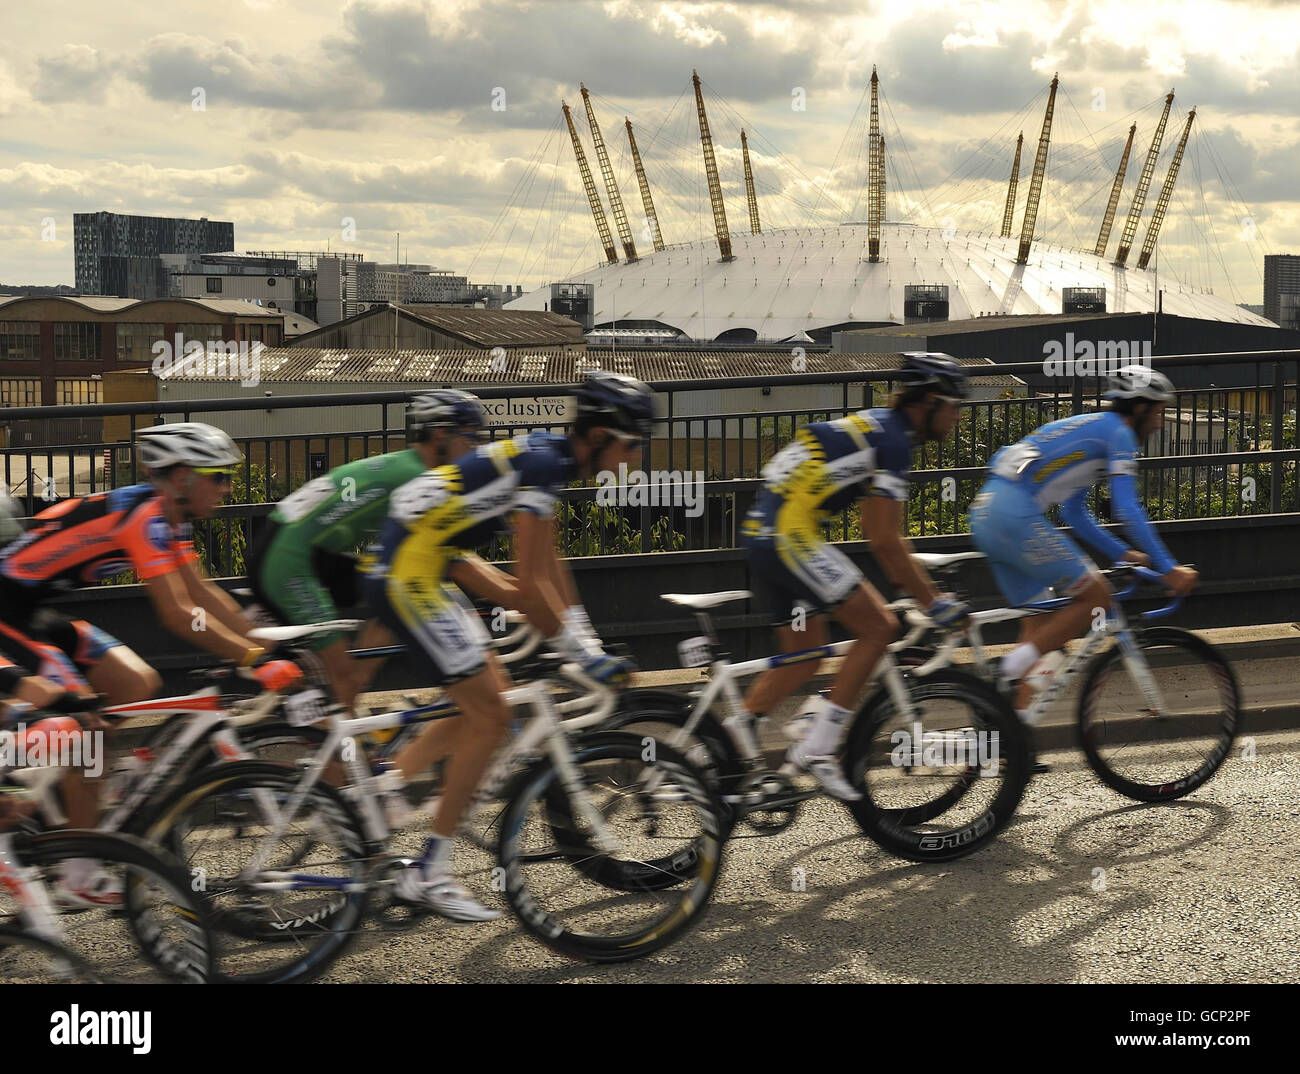 Cycling - 2010 Tour of Britain - Stage 8 - London. Riders pass through London's Docklands overlooking the O2 during stage 8 of of the Tour of Britain in London. Stock Photo